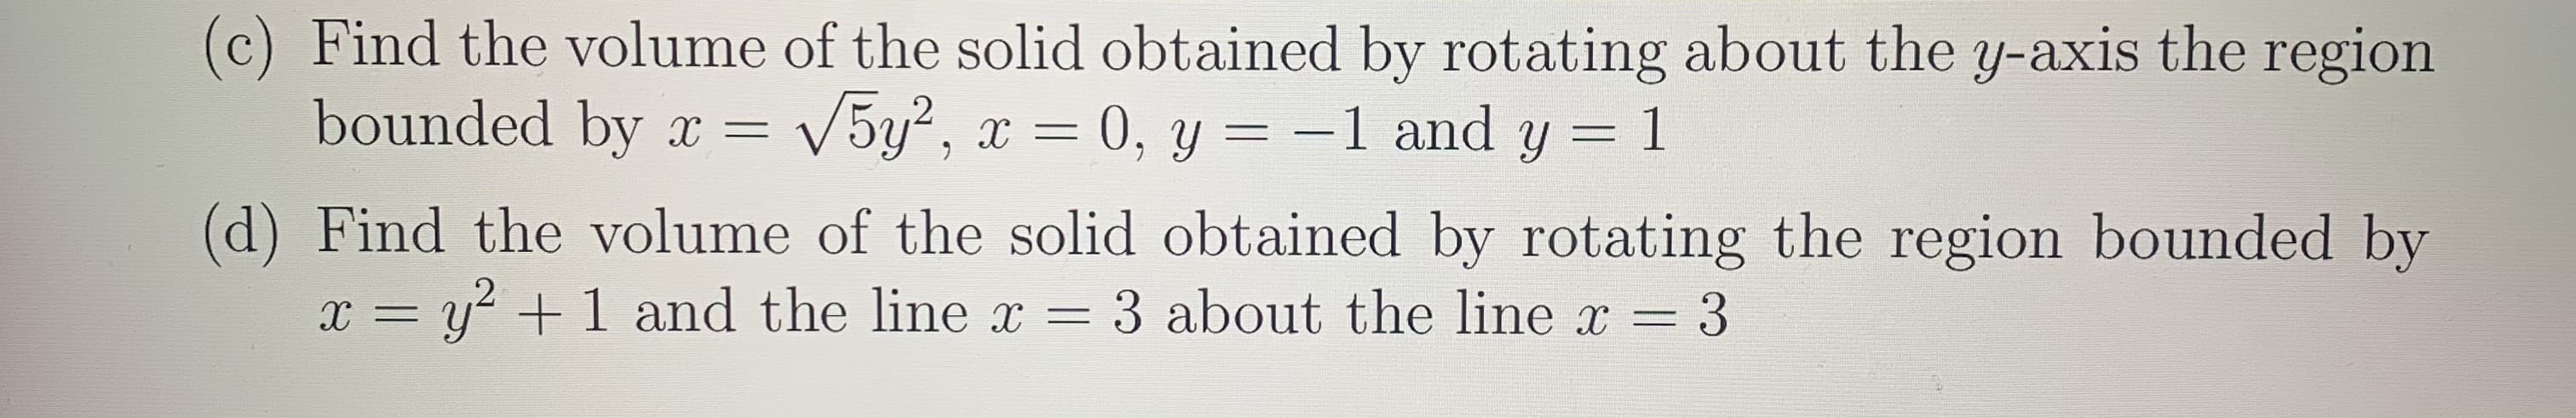 (c) Find the volume of the solid obtained by rotating about the y-axis the region
bounded by
= V5y?
= 0, y = -1 and y
1
х
(d) Find the volume of the solid obtained by rotating the region bounded by
= y + 1 and the line x = 3 about the line x 3
х —
